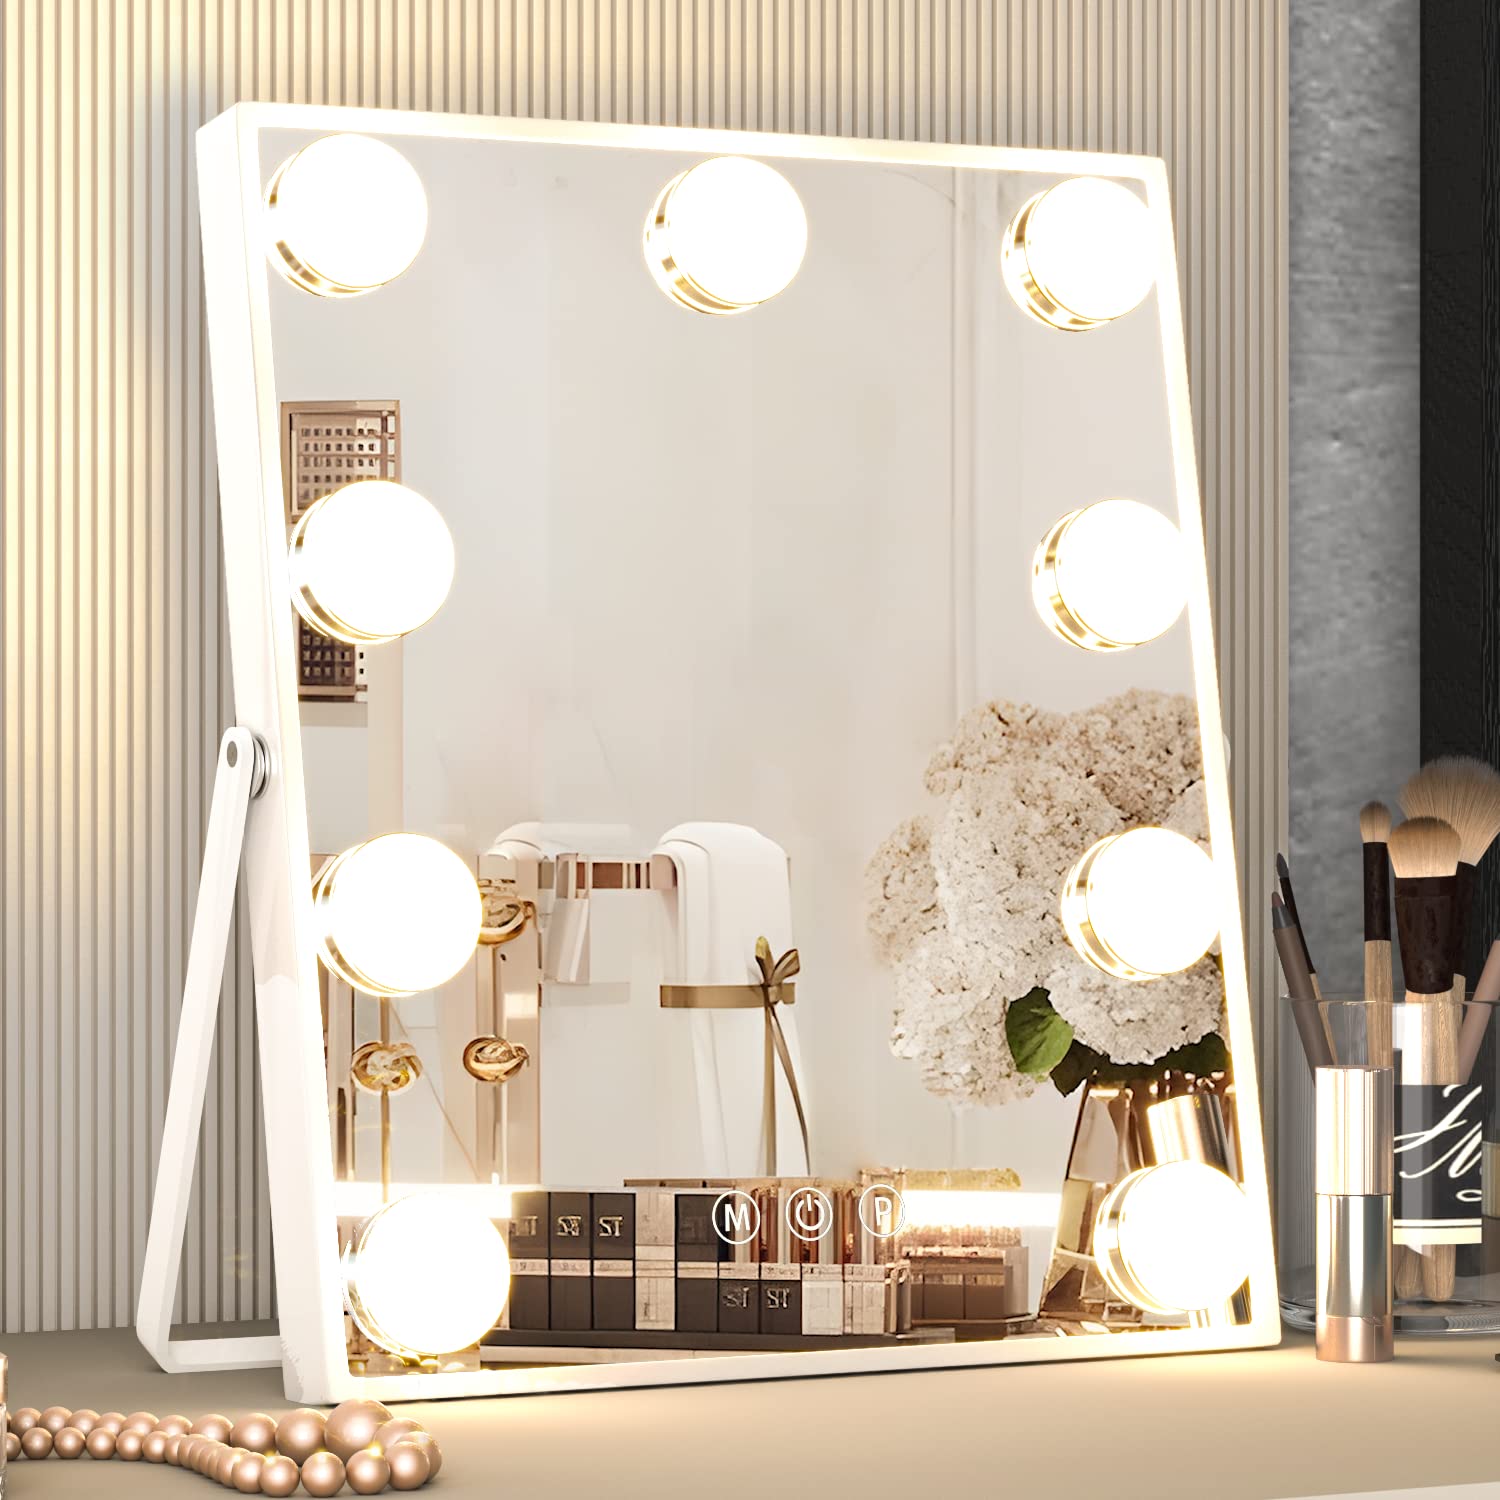 Manocorro Hollywood Vanity Mirror with Lights, Hollywood Makeup Mirror with 9 LED Bulbs, Vanity Mirror with 3 color Lighting Mod